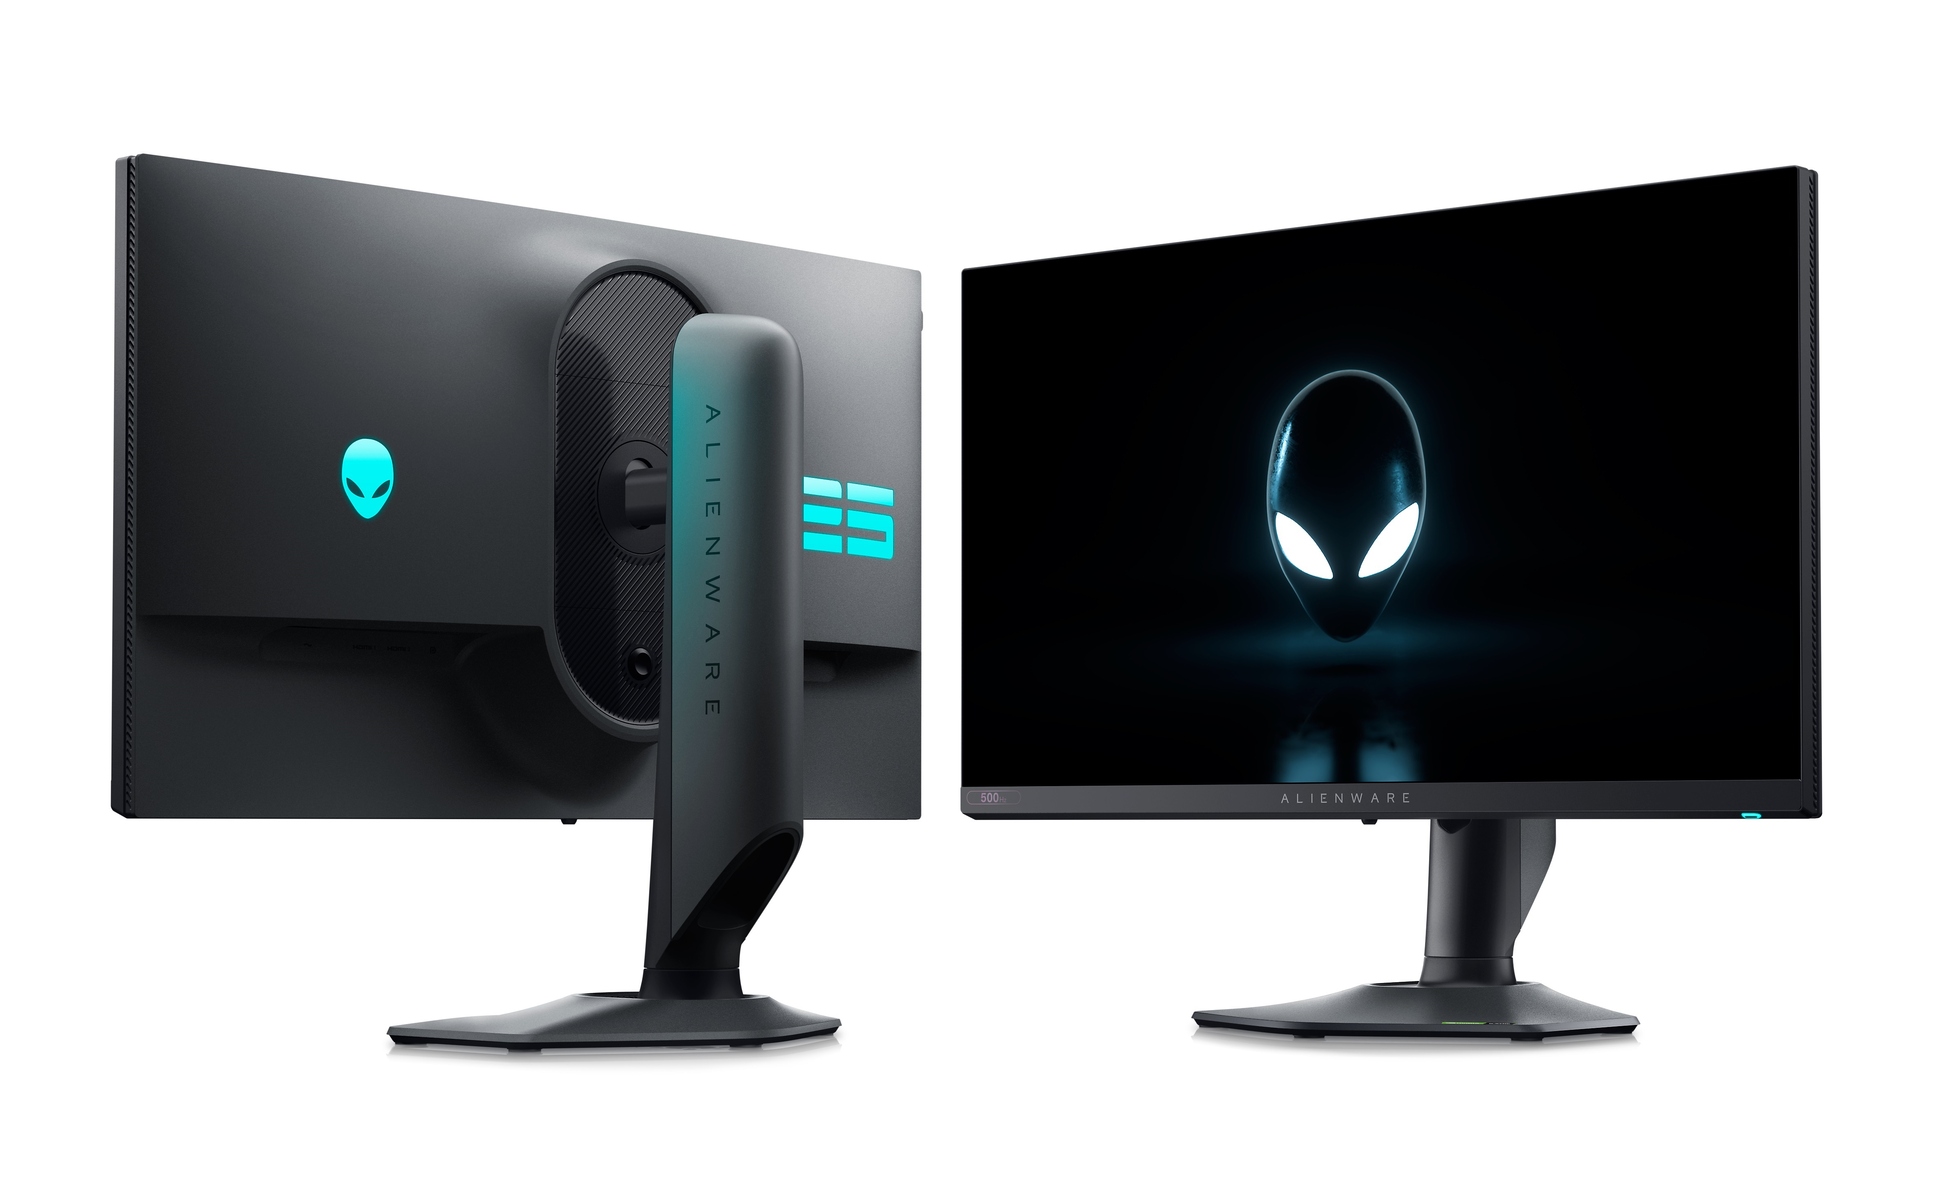 What Is The Alienware Gaming Monitor